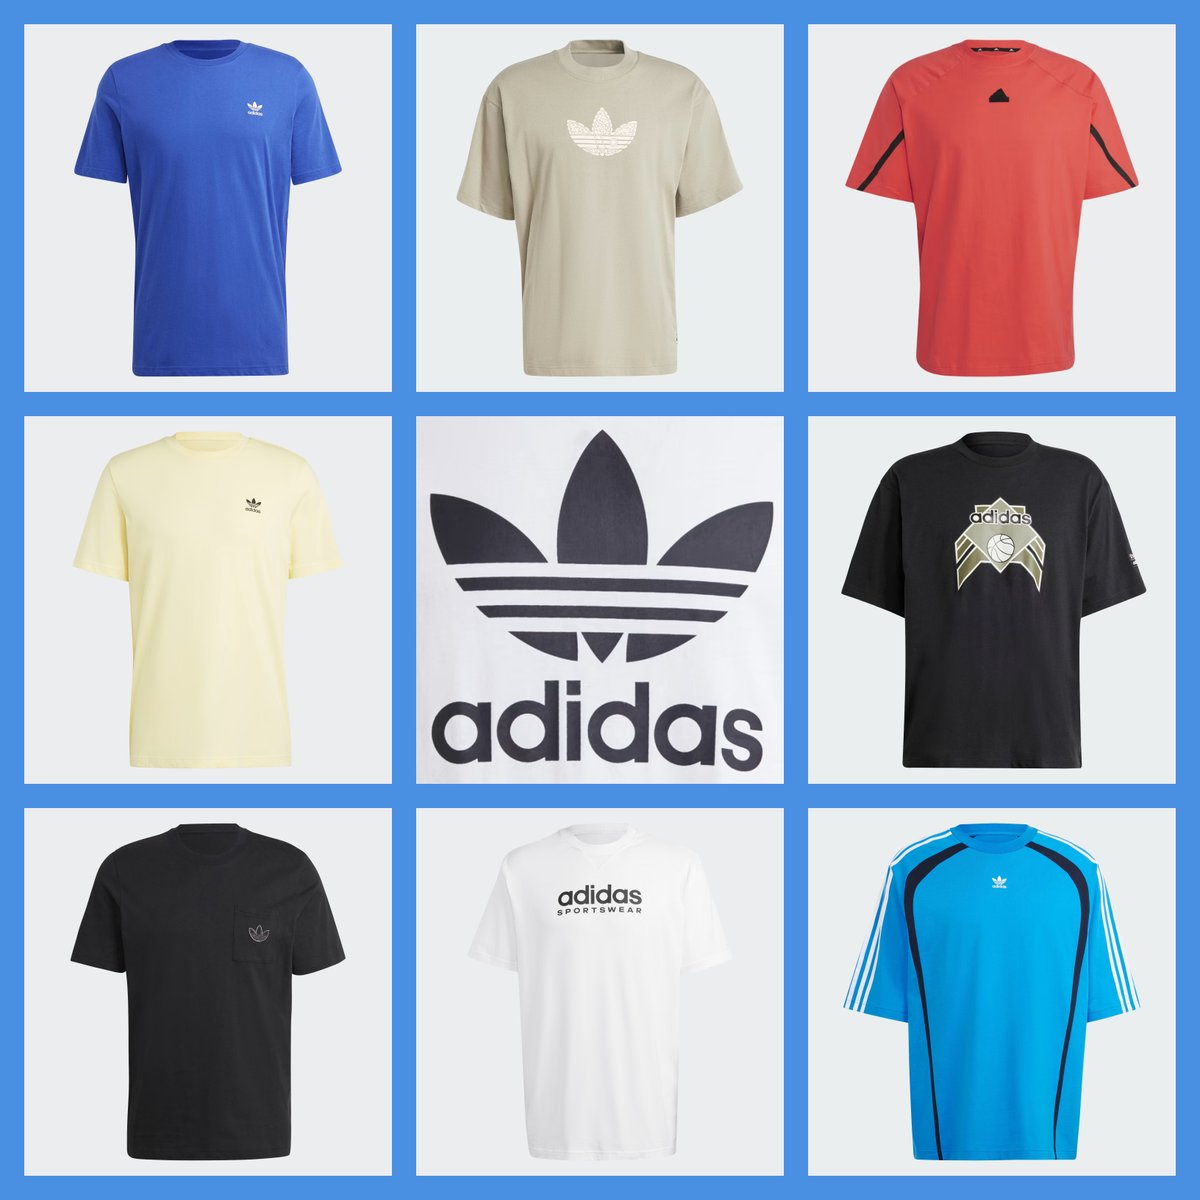 Ad: adidas Outlet - Up to 50% off T-Shirts🌞😎 Get ready for summer with over 160 styles now included in the sale Shop the offers here >> tidd.ly/49aA8rQ *Ltd stock and sizes on some